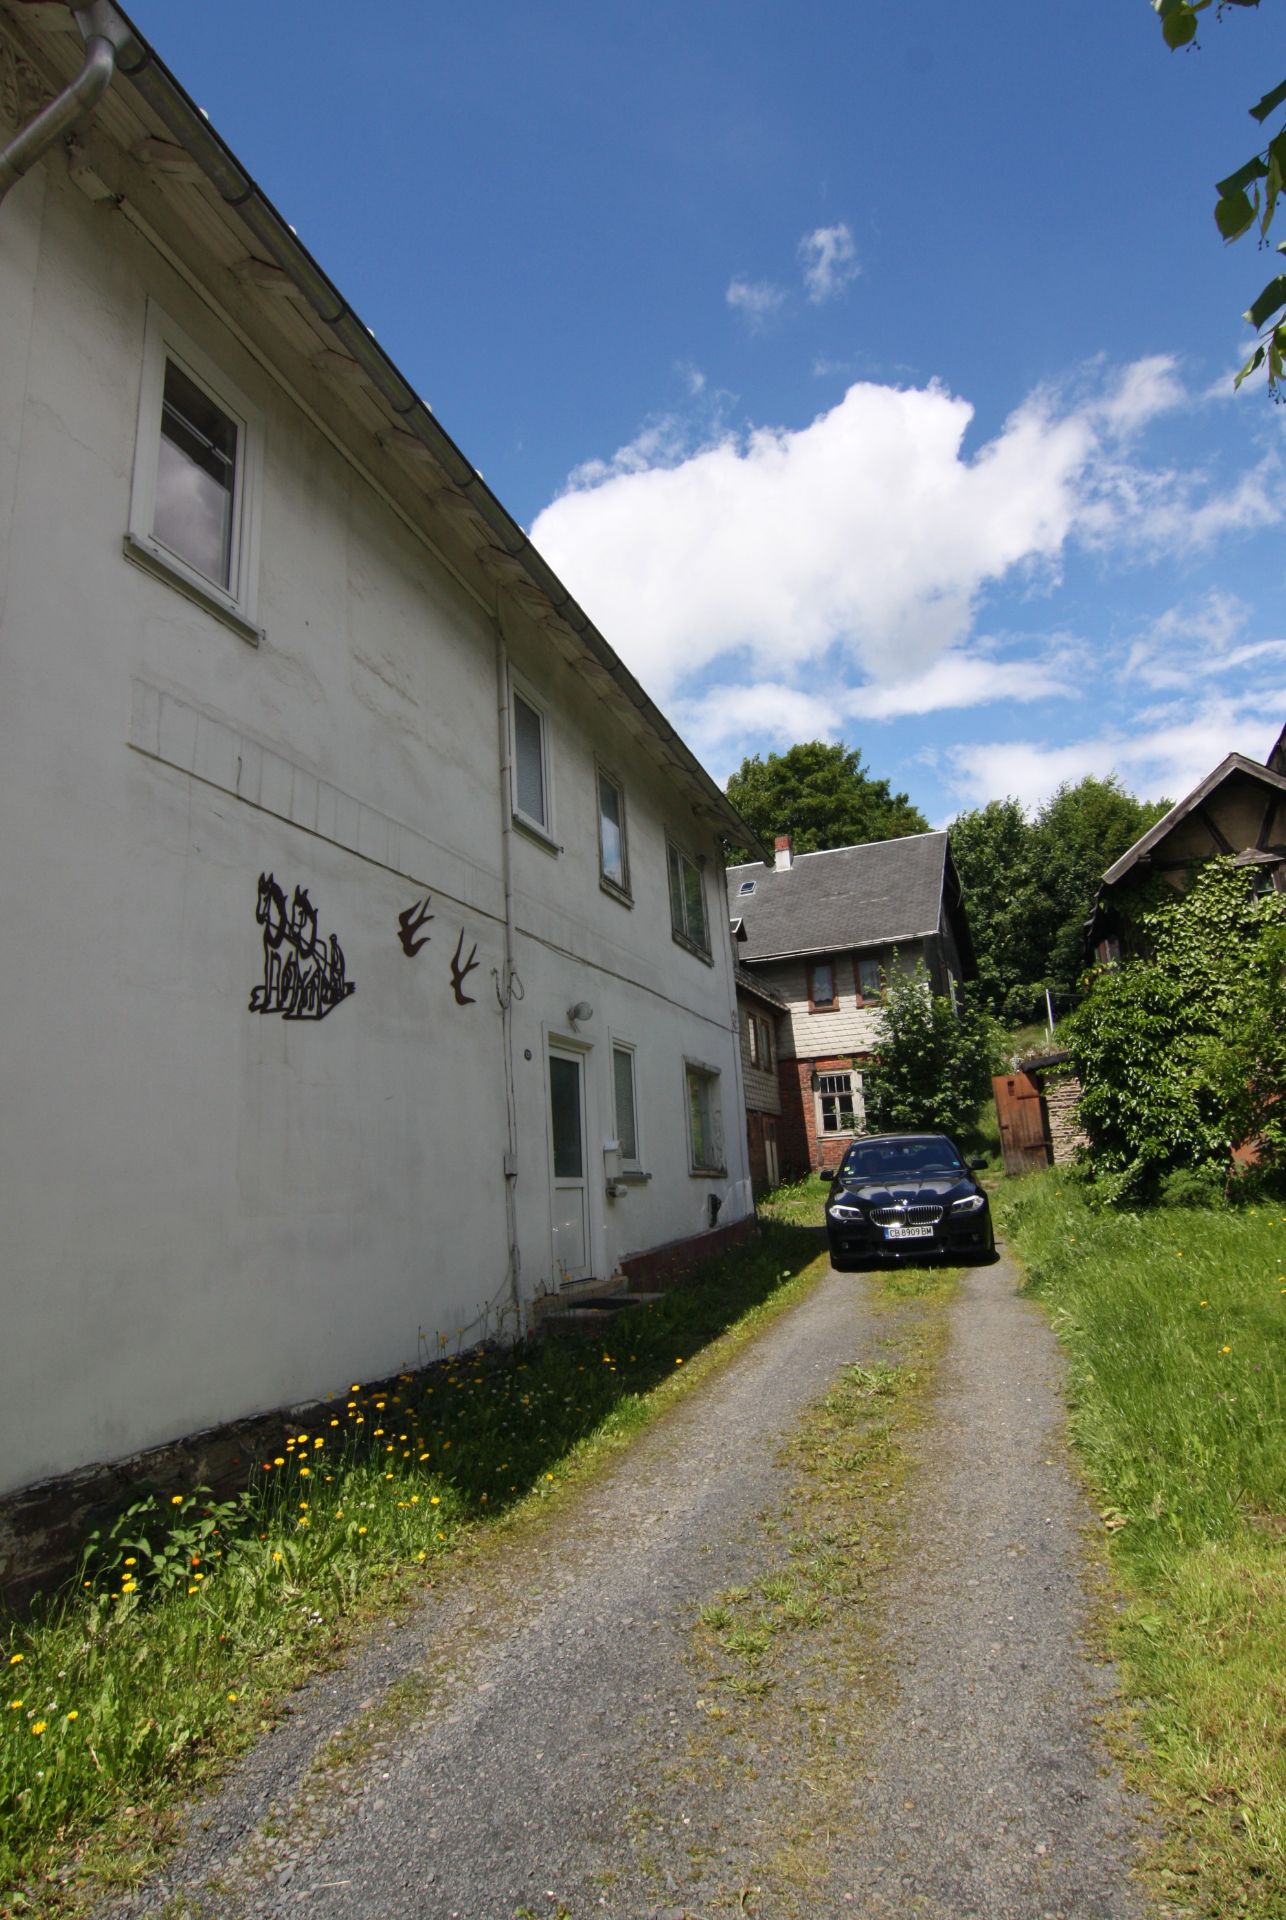 Meuselbach-Schwarzm.hle, Germany - HUGE 50 ROOM HOUSE(S) PUB AND WORKSHOPS 1/2 ACRE - Image 83 of 113